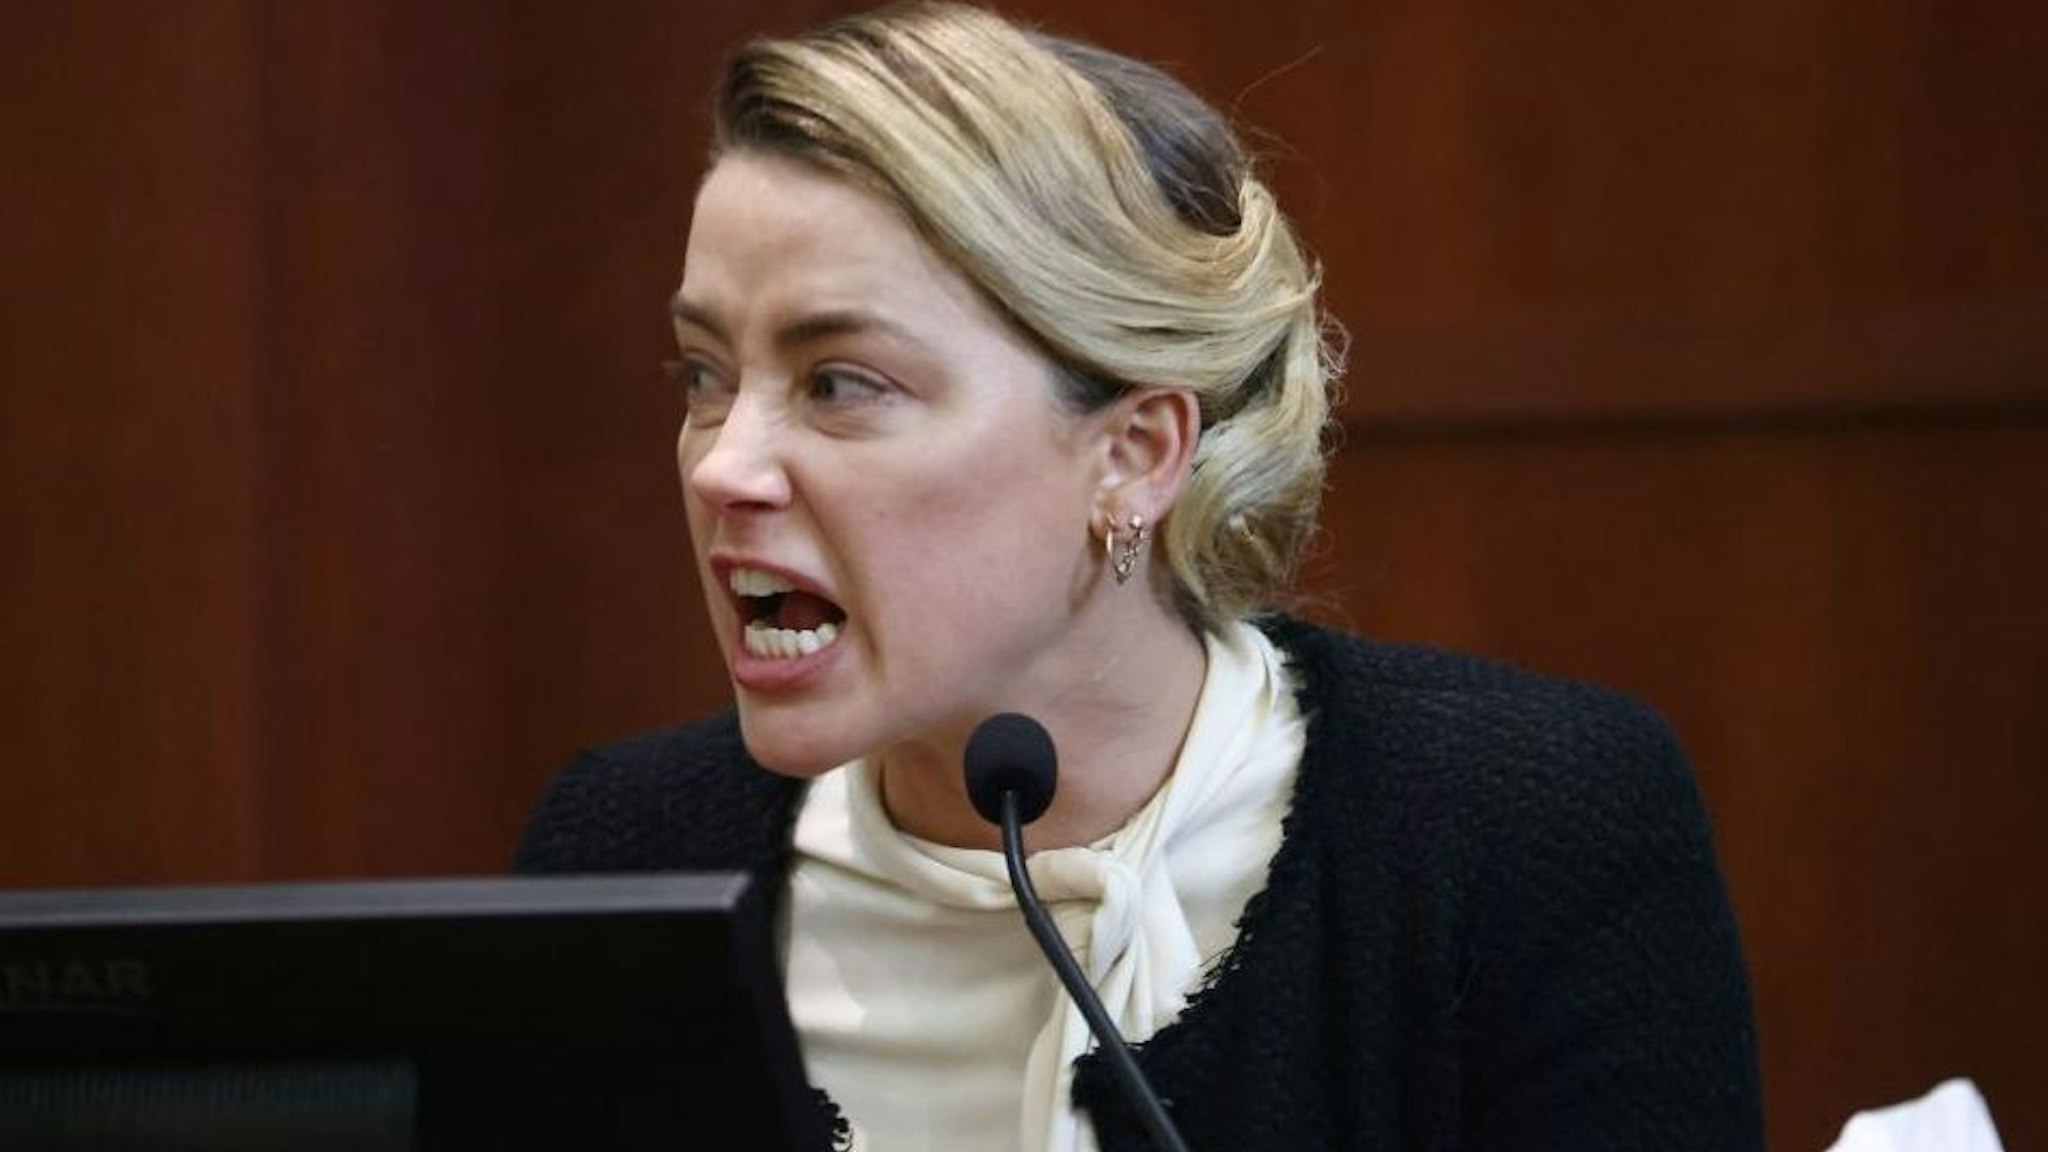 US actress Amber Heard testifies at the Fairfax County Circuit Courthouse in Fairfax, Virginia, on May 5, 2022.